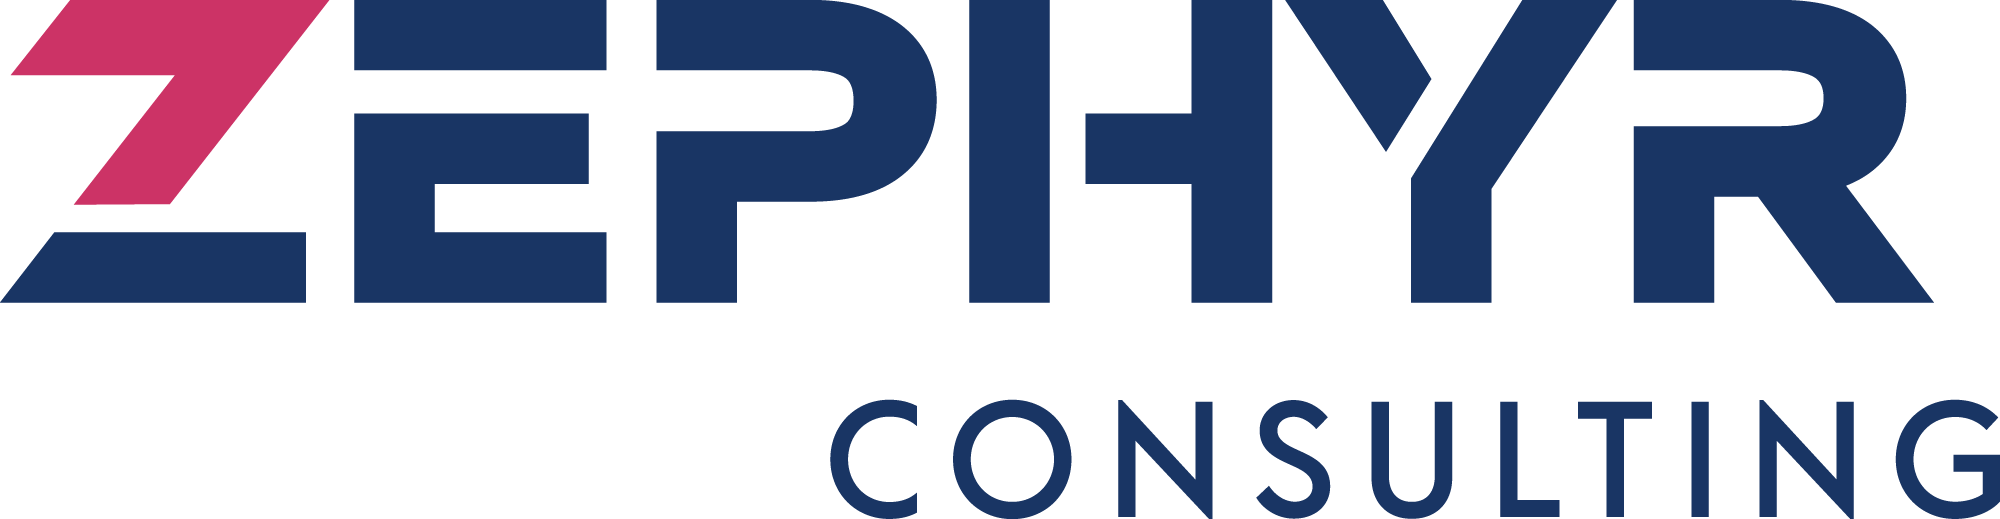 Zephyr Consulting ApS